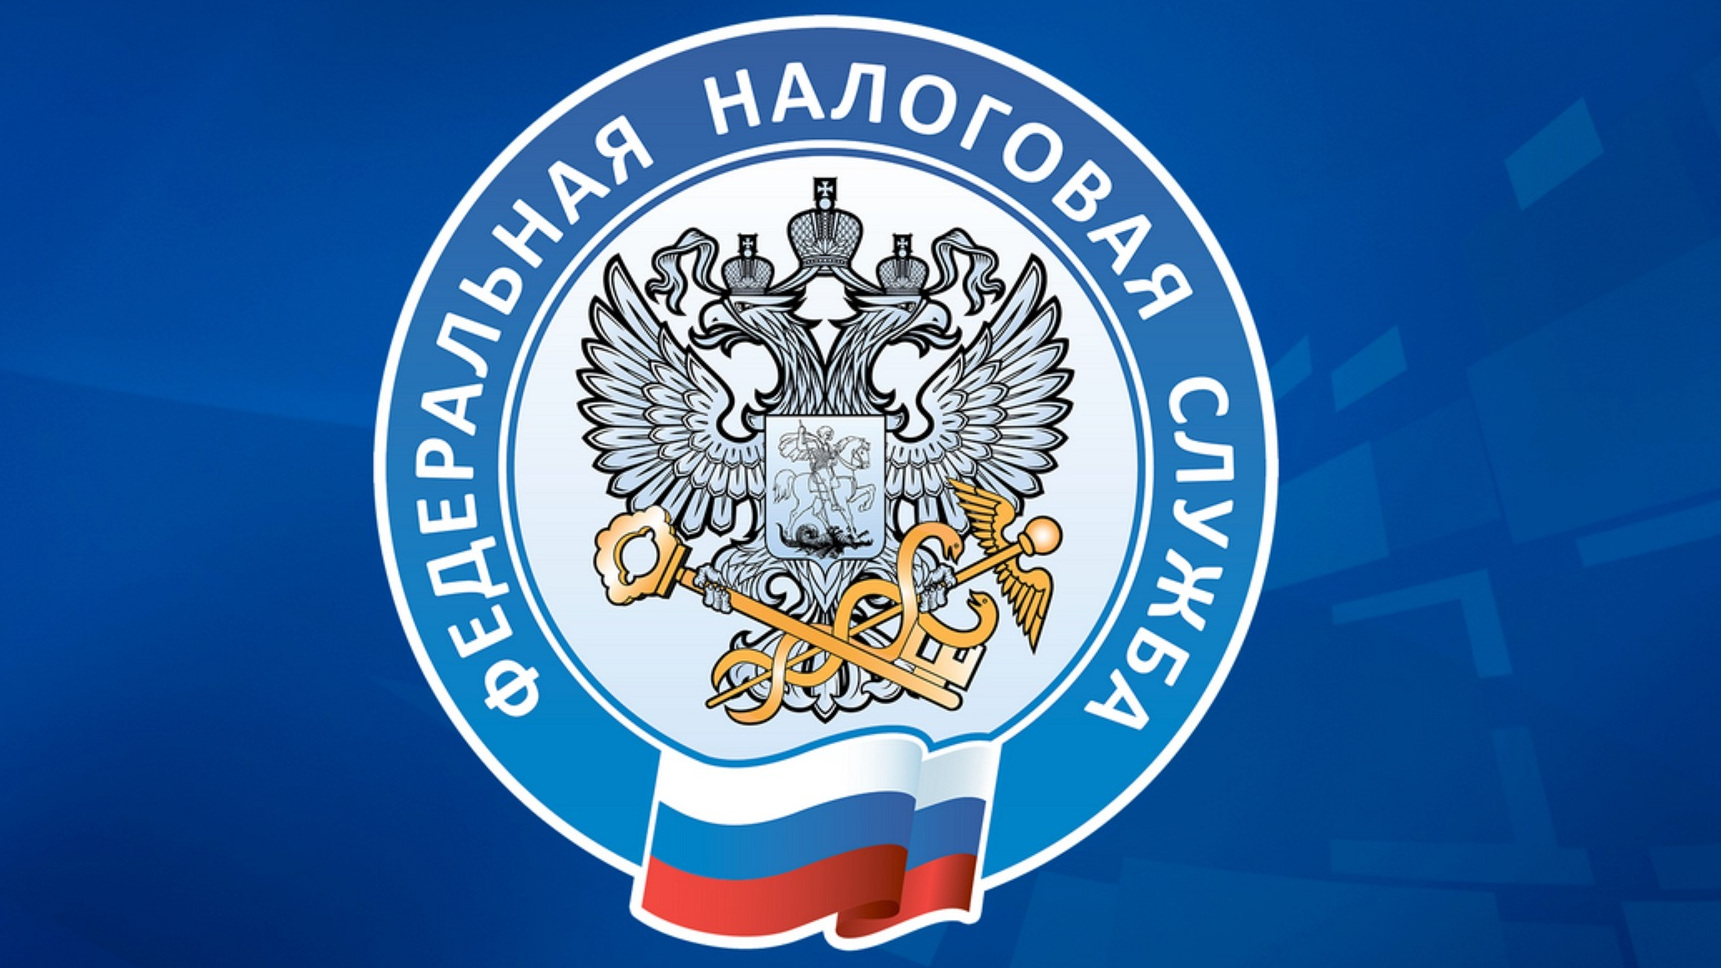 The Federal Tax Service of Russia is holding an international forum 